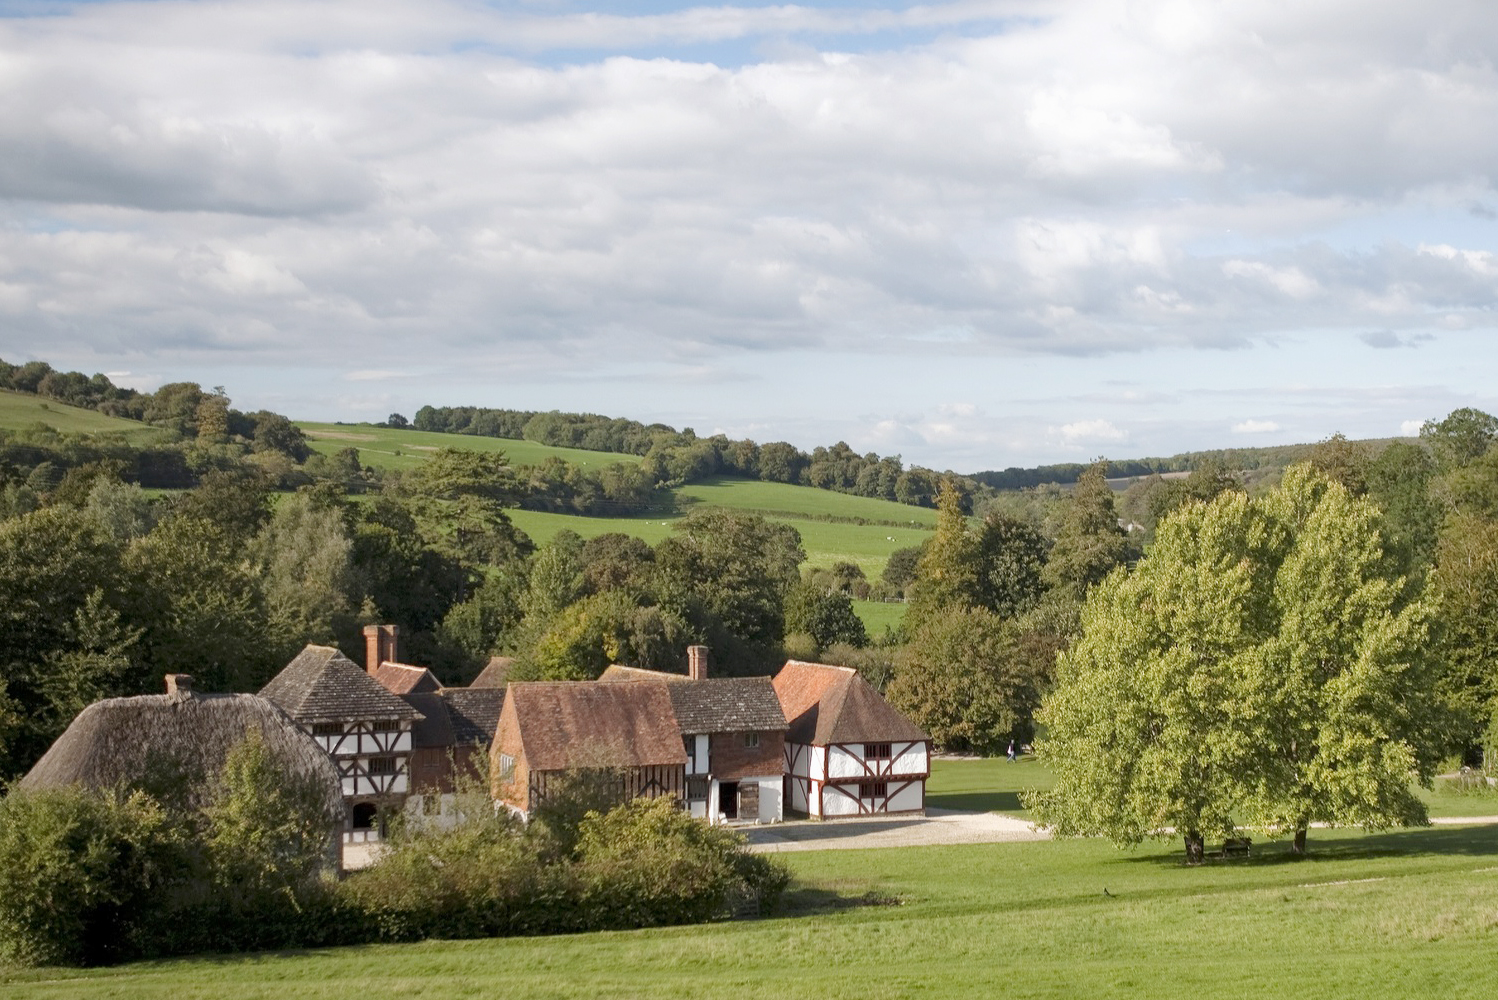 Grounds of the Weald and Downland Museum, Singleton showing medieval buildings within the green rolling countryside of the South Downs. Just one of the arts, history and culture attractions nearby